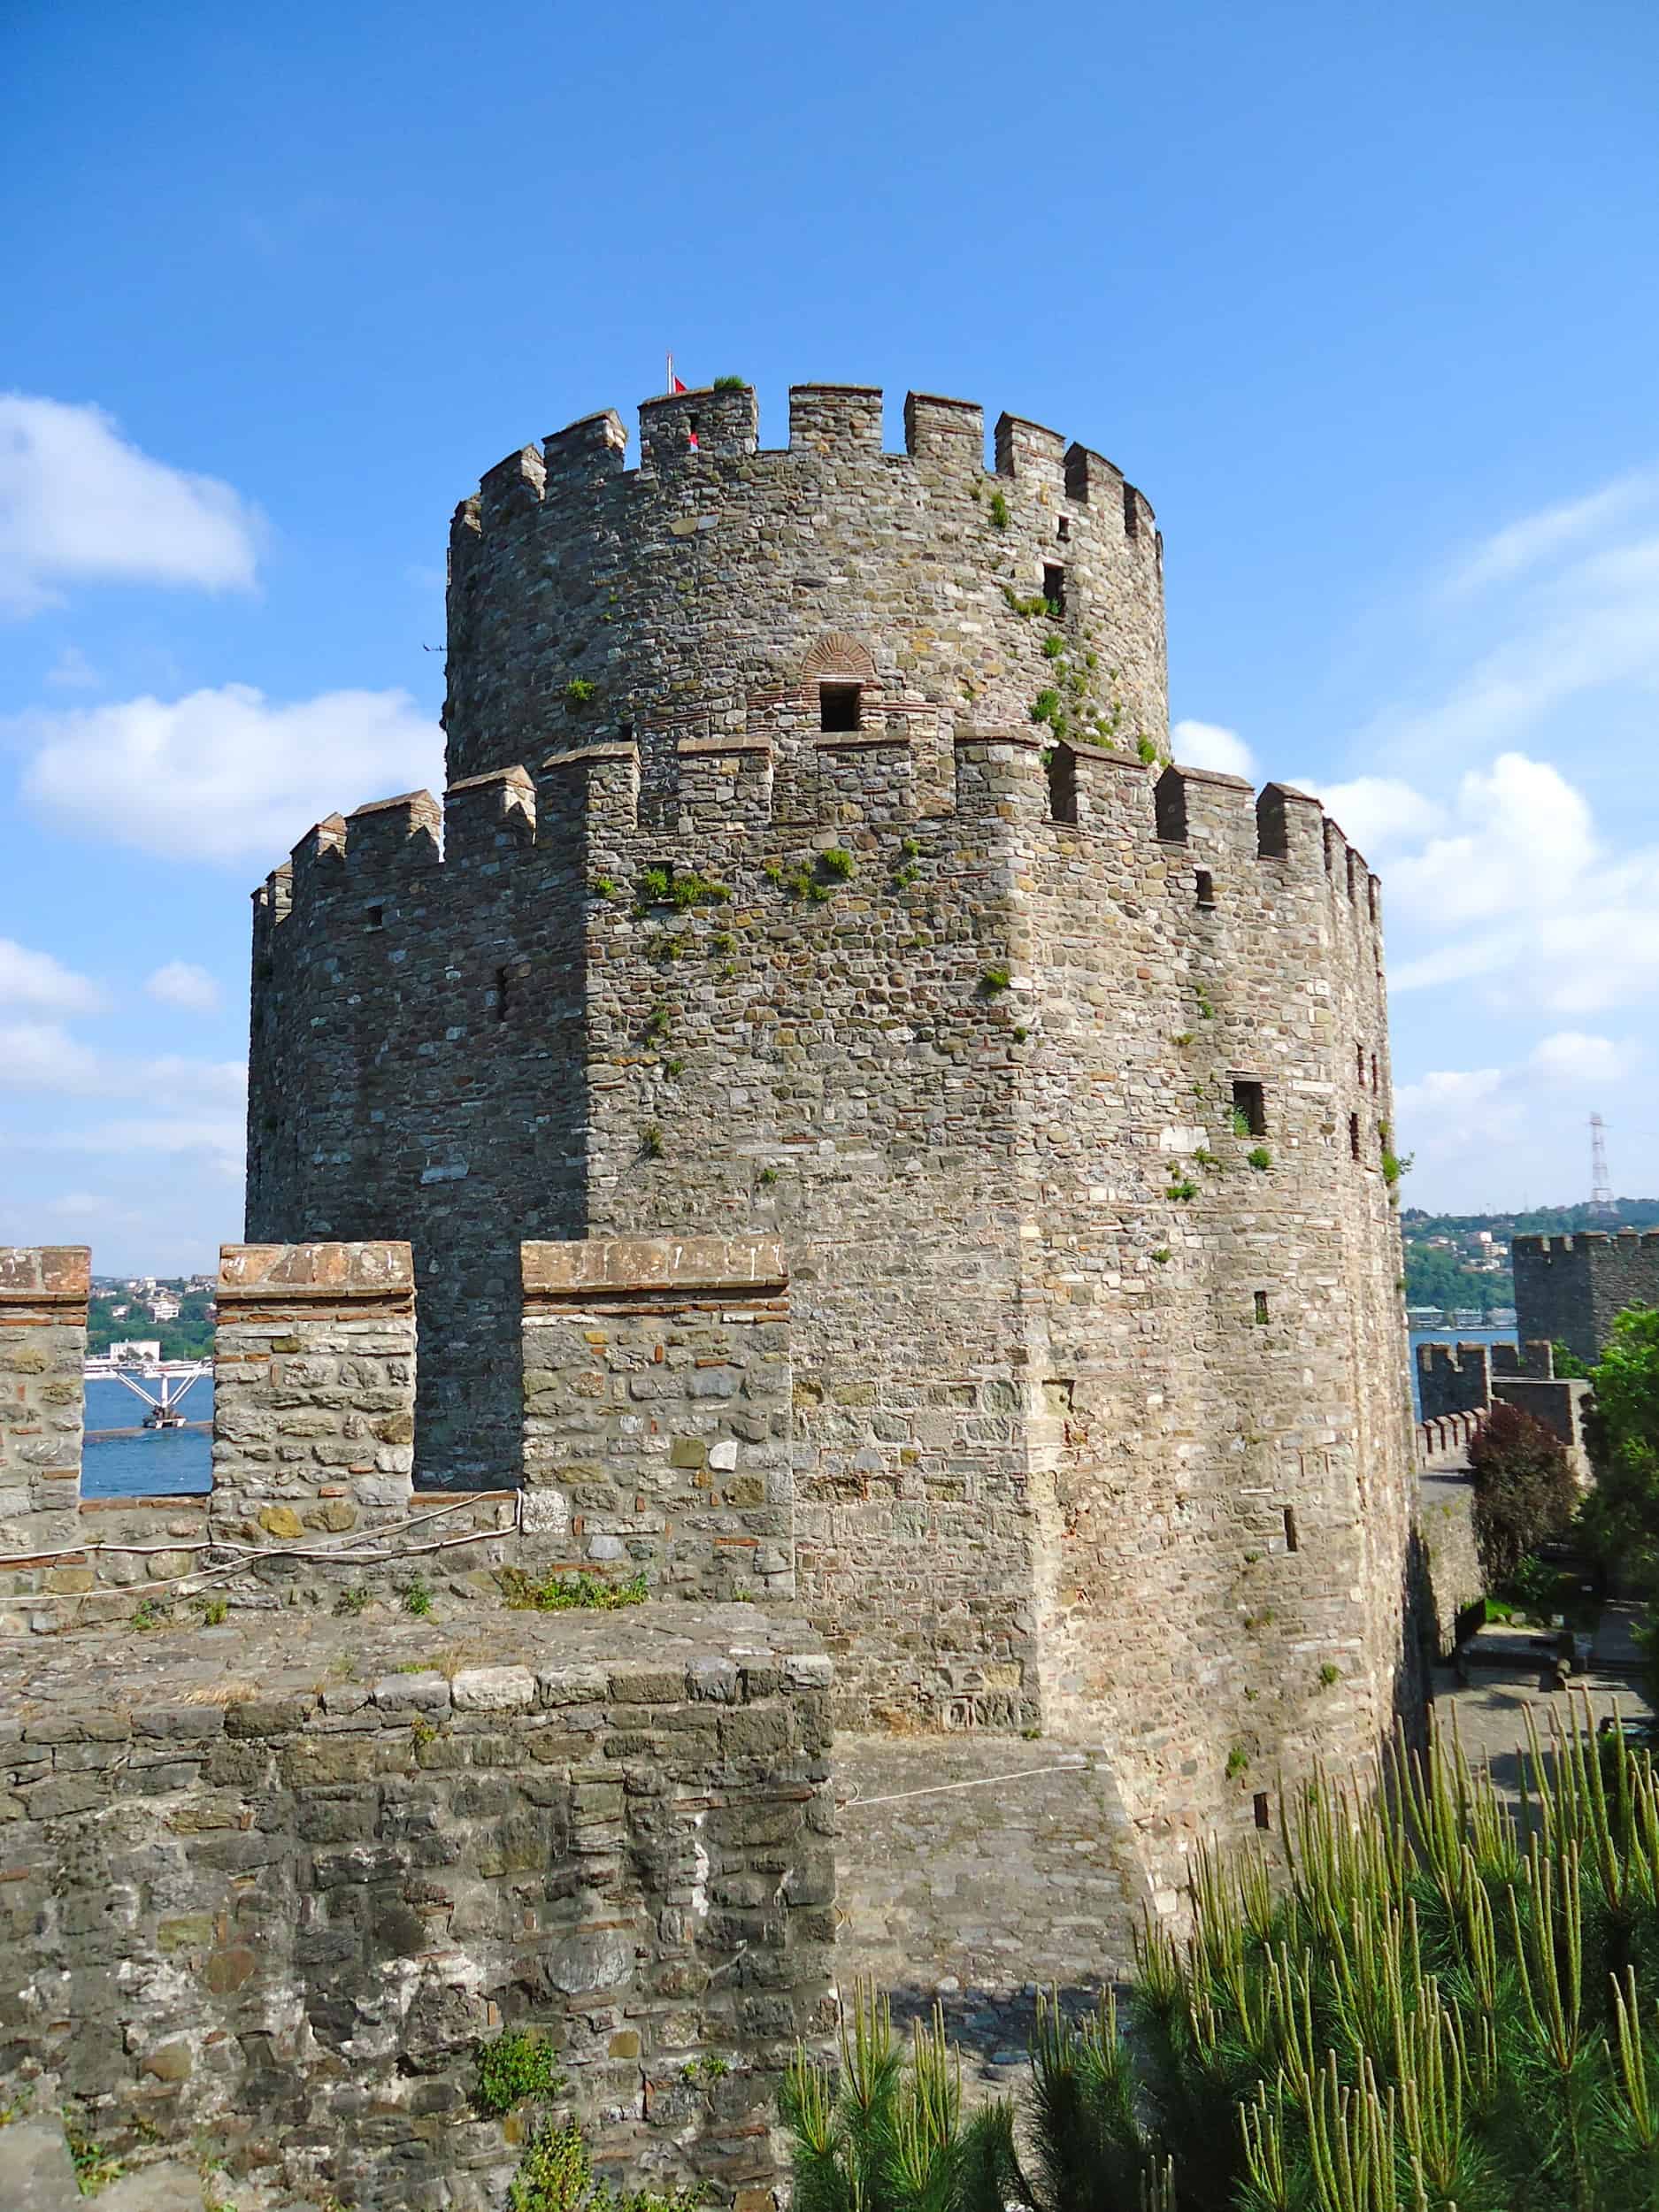 Halil Pasha Tower at Rumeli Fortress in Istanbul, Turkey